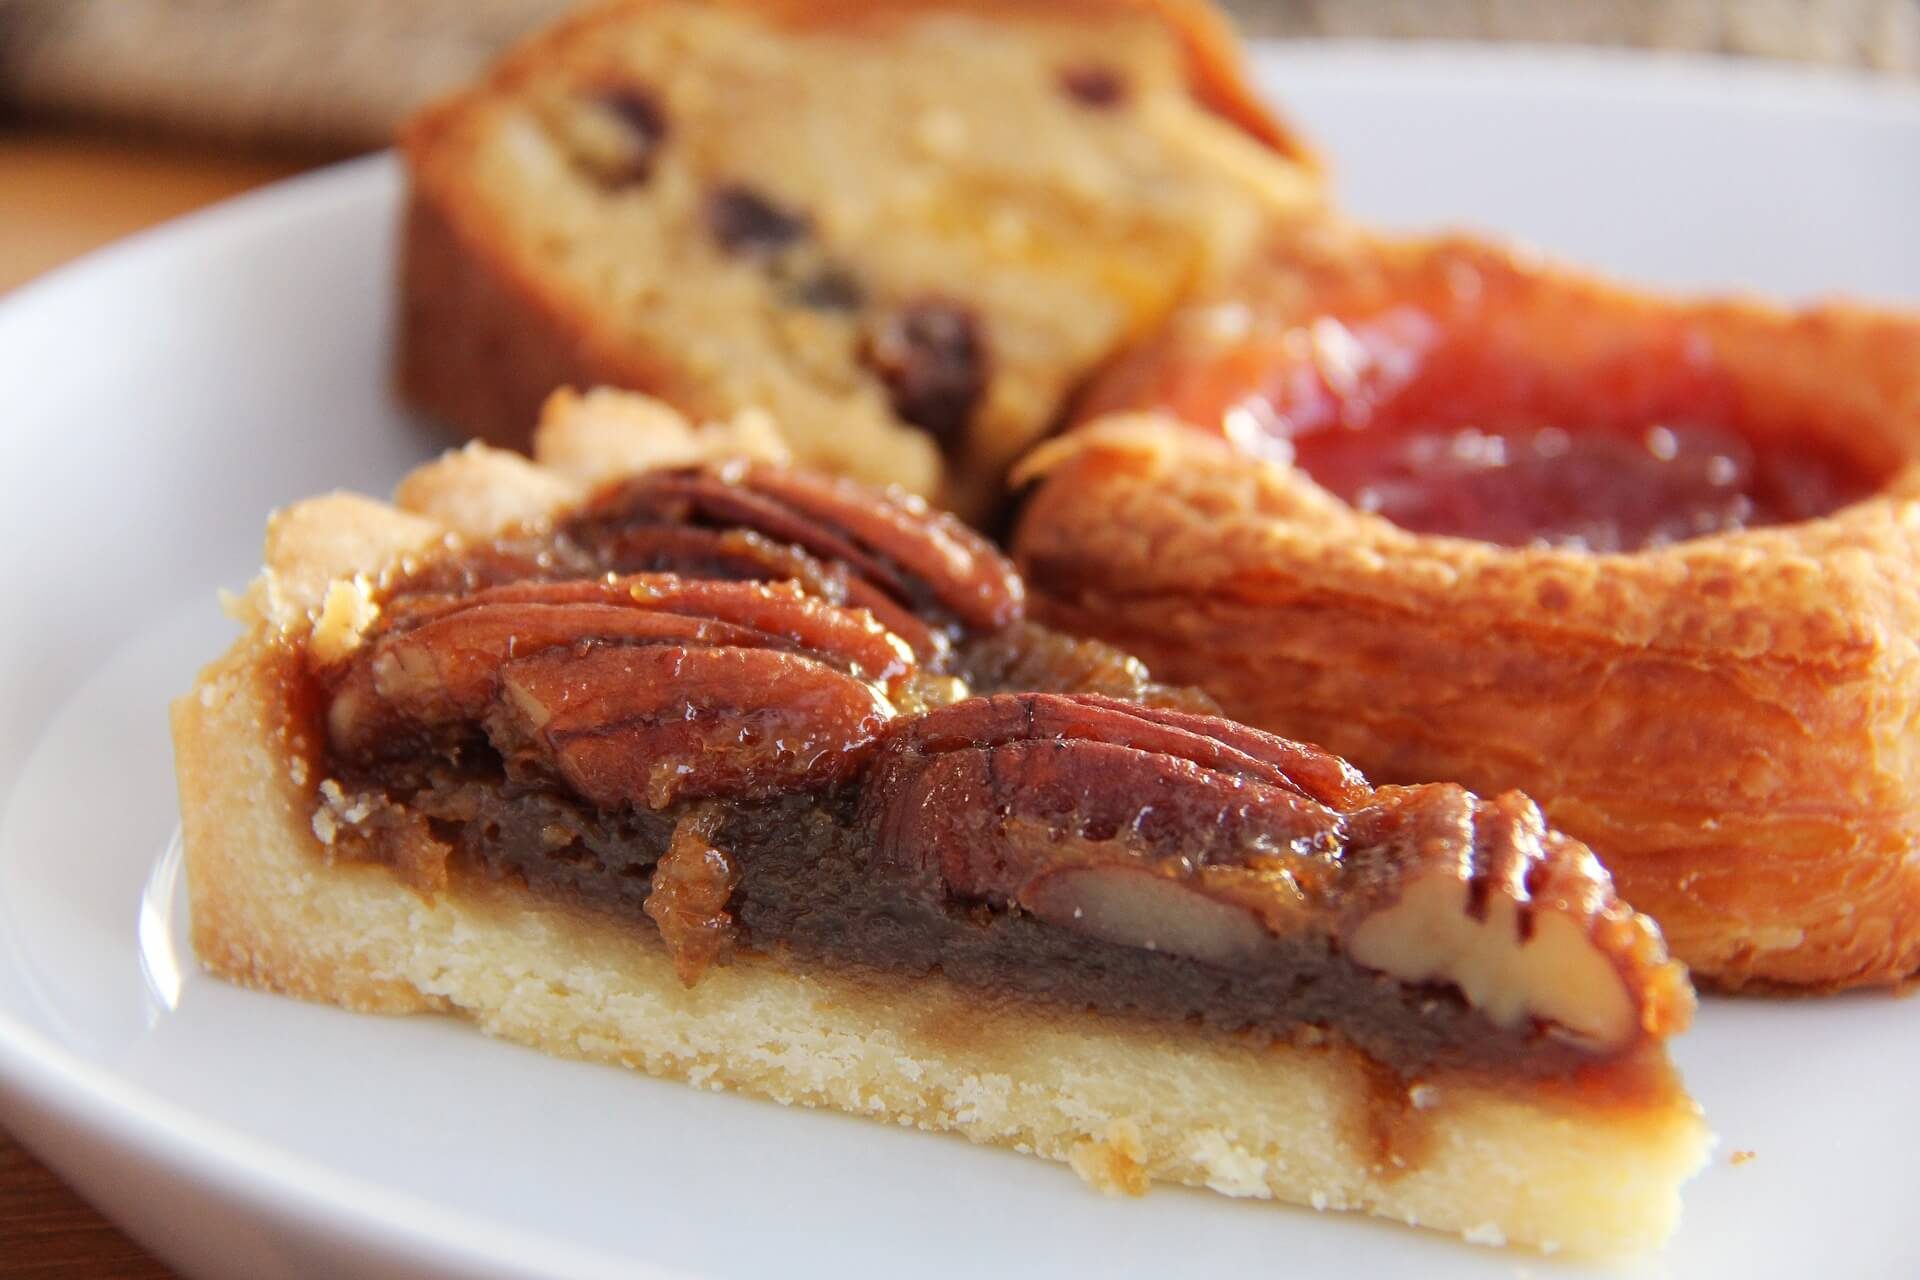 The Best Local Foods to Eat in Ottawa - Maple Pecan Pie